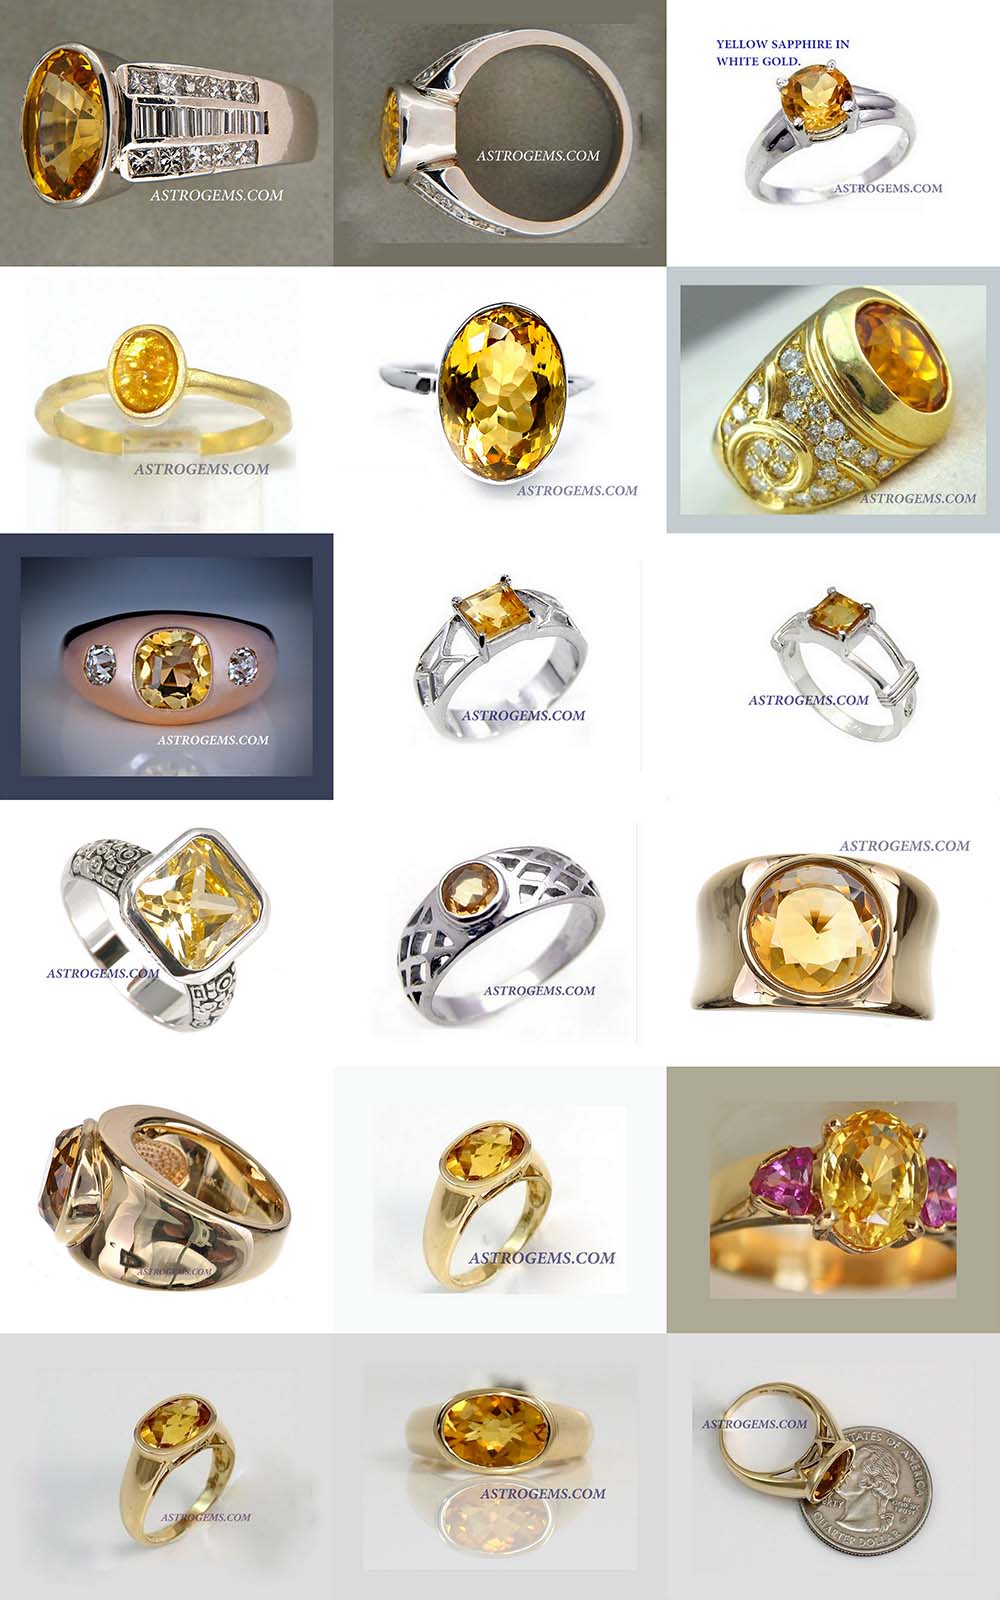 Astrogems can make ayurvedic Yellow Sapphire rings in any style.